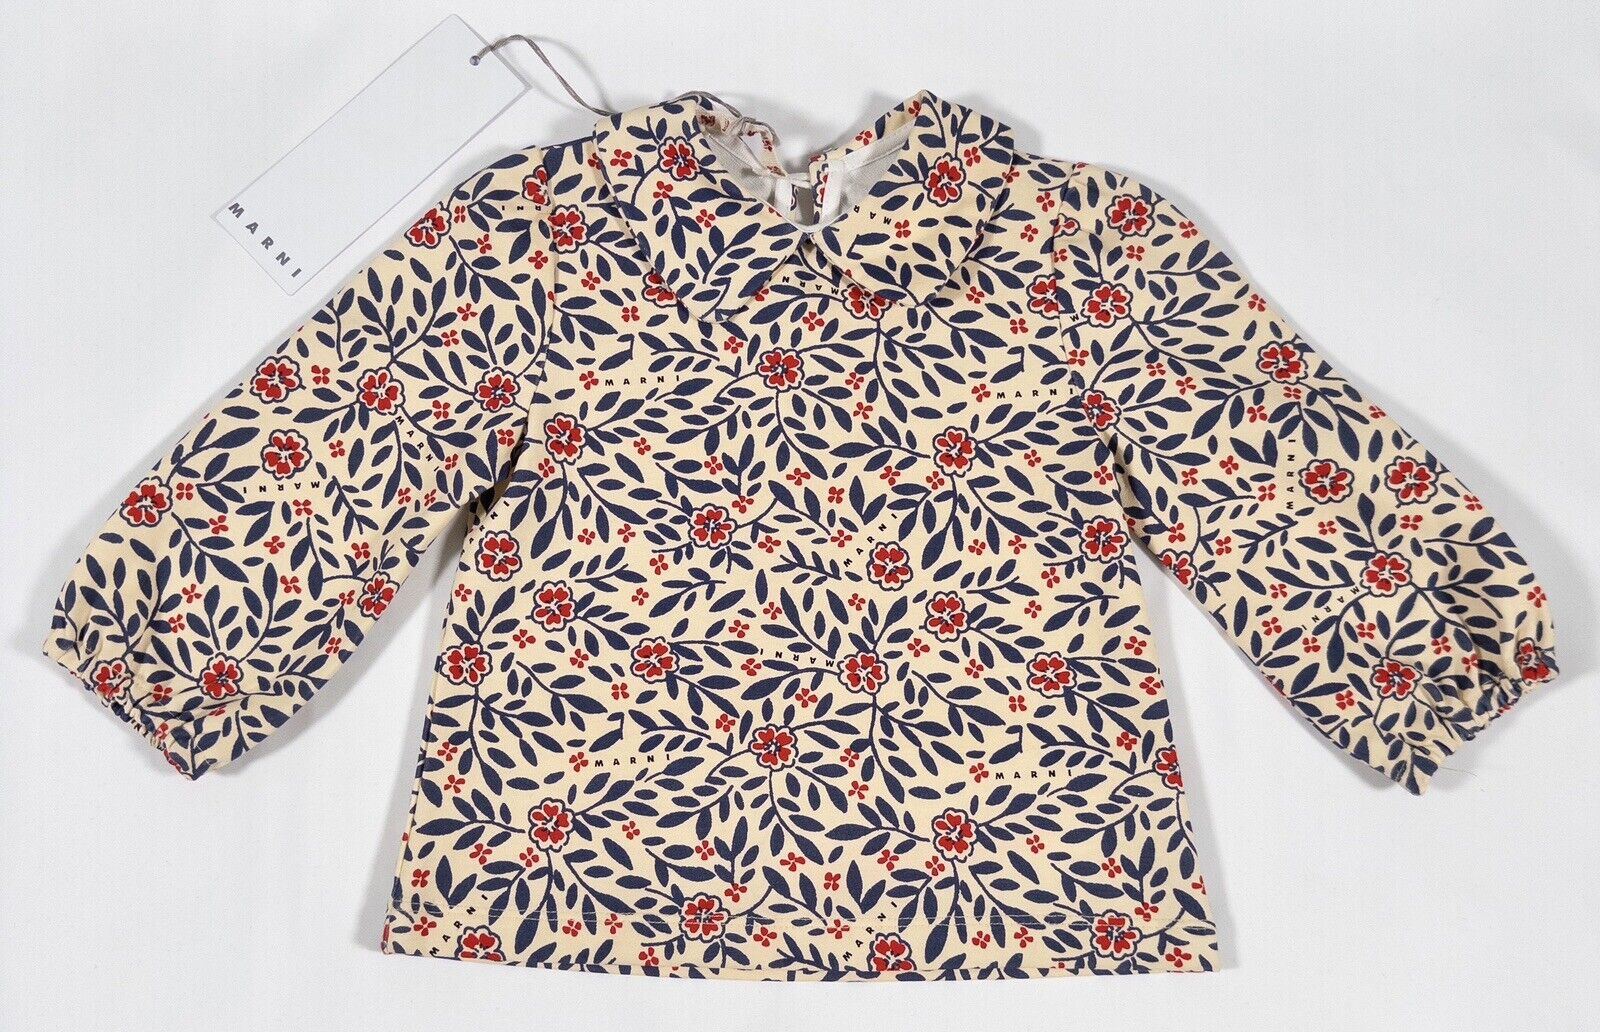 MARNI Kids Baby Girls Floral Top Blouse Blue Red Cream Collar Size UK 12 Months